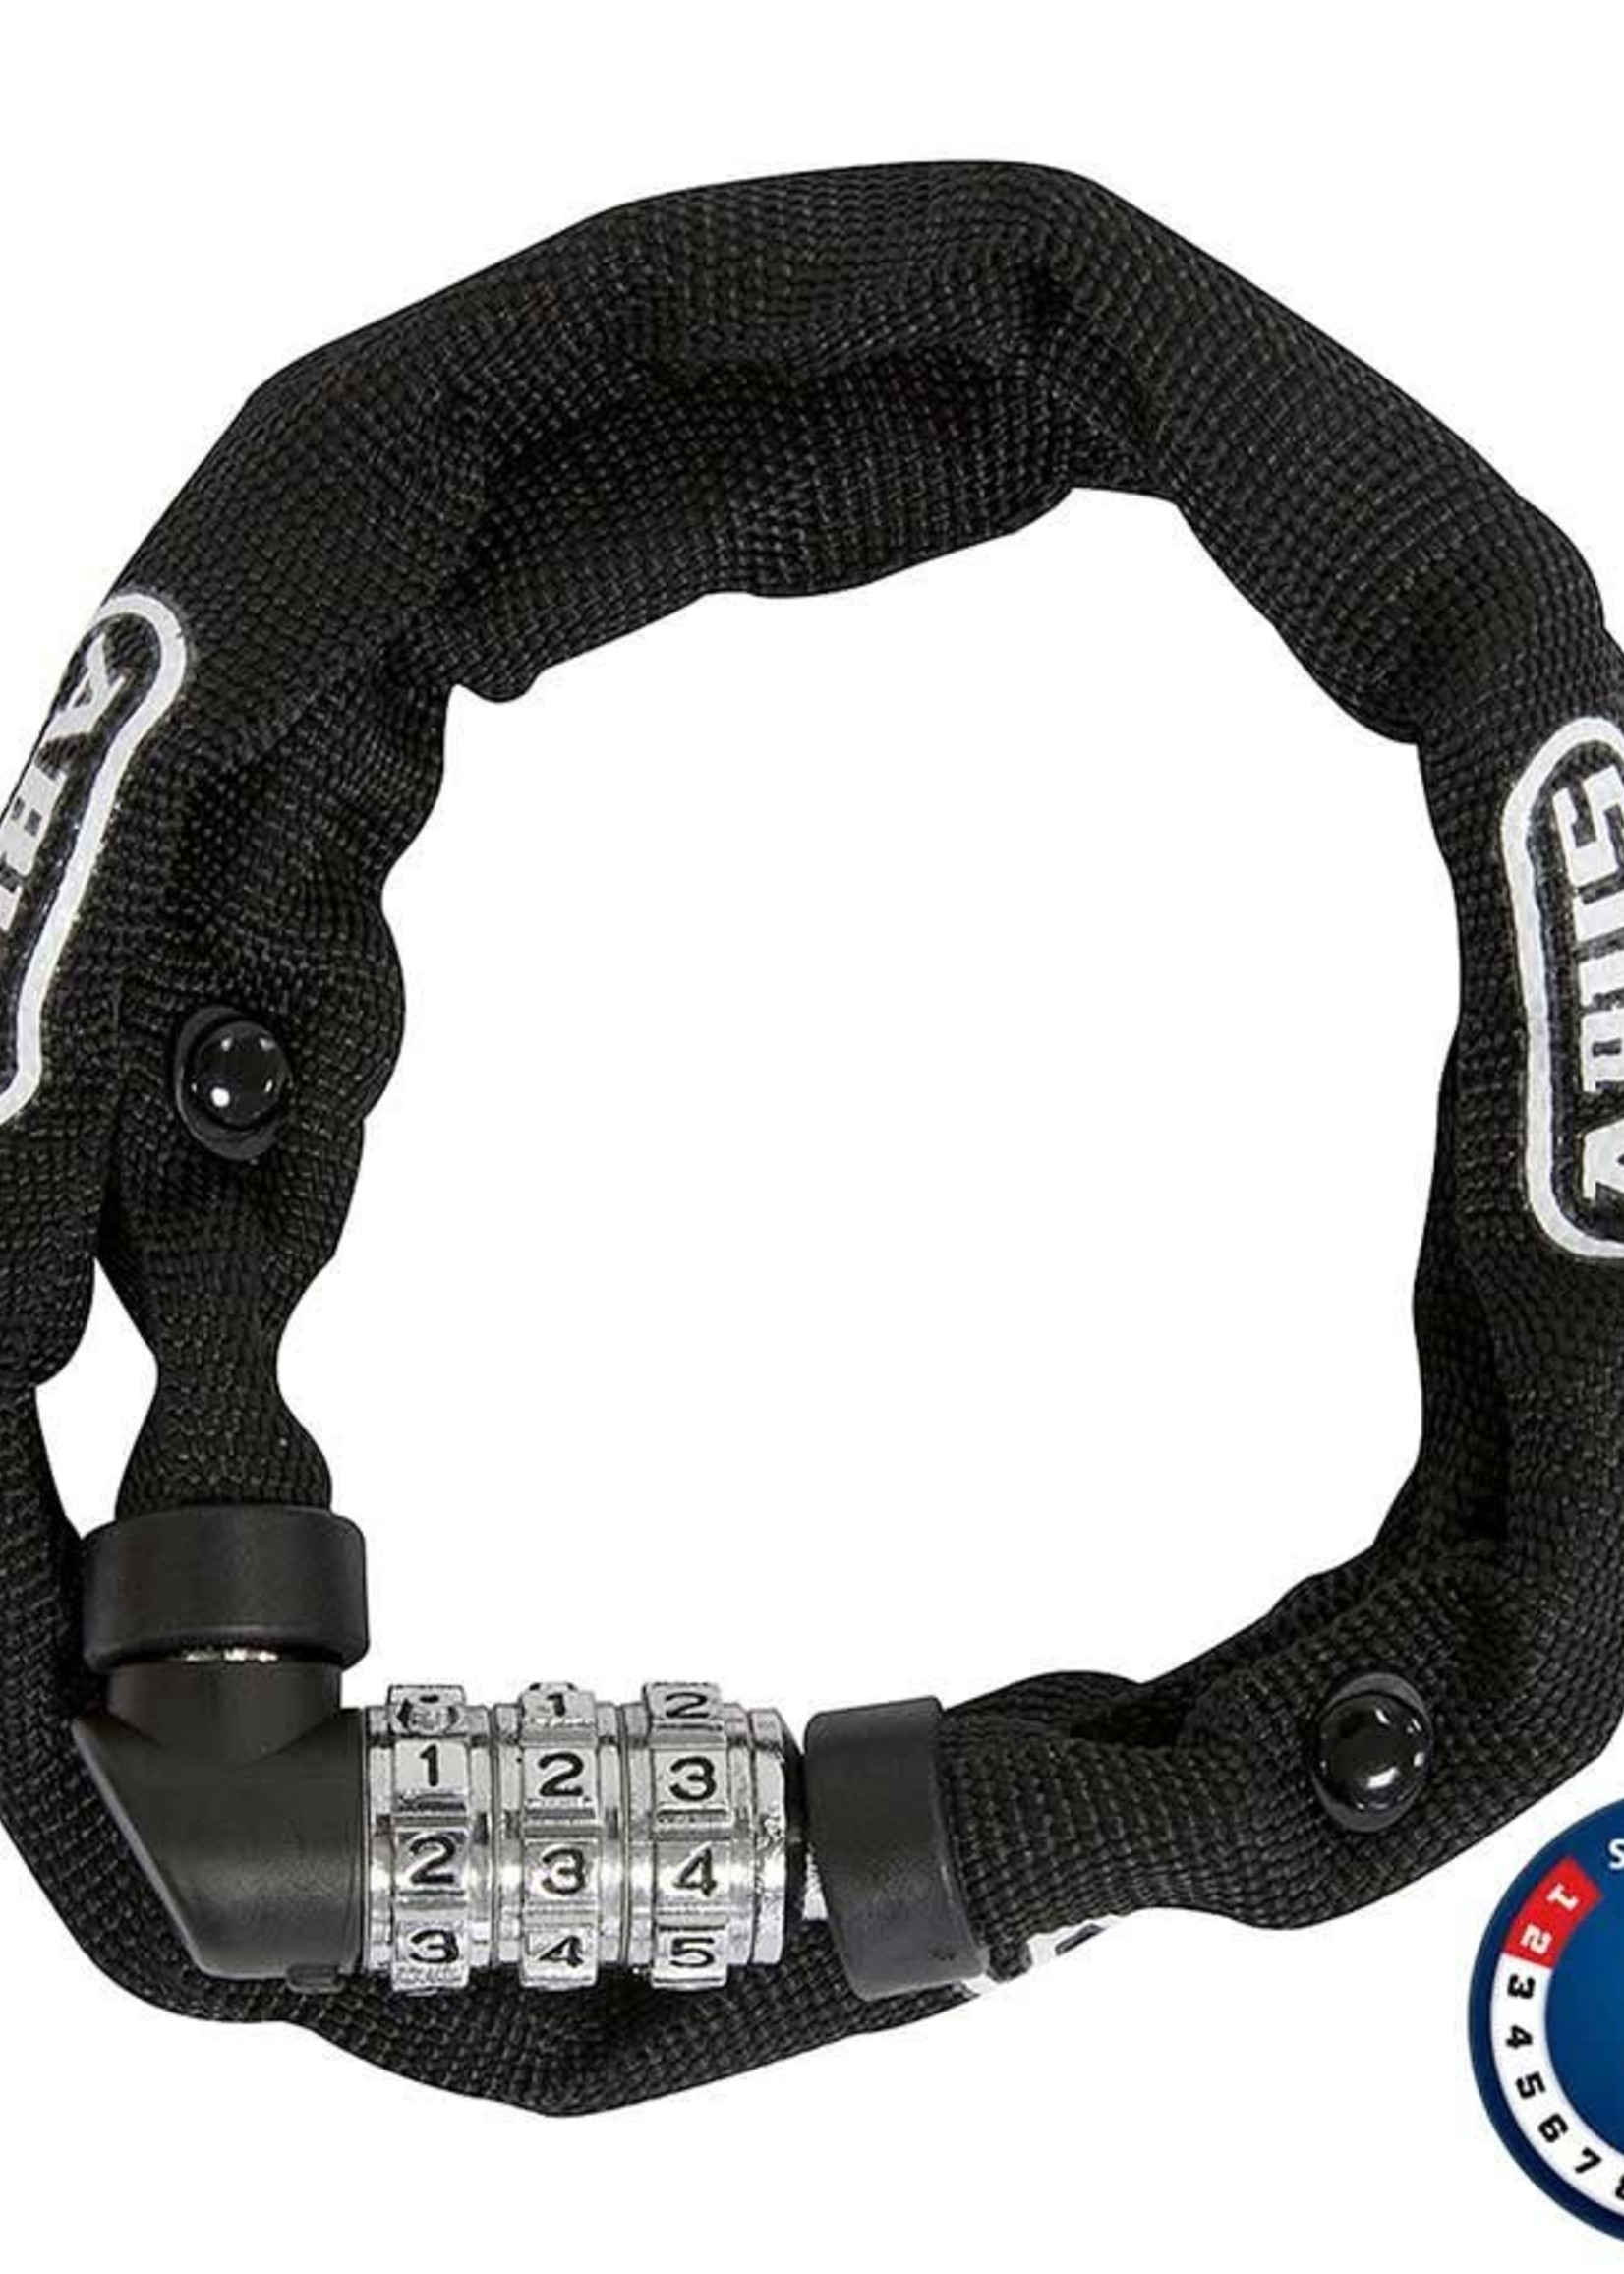 Abus Abus, 1200, Chain with combination lock, 60cm (2')